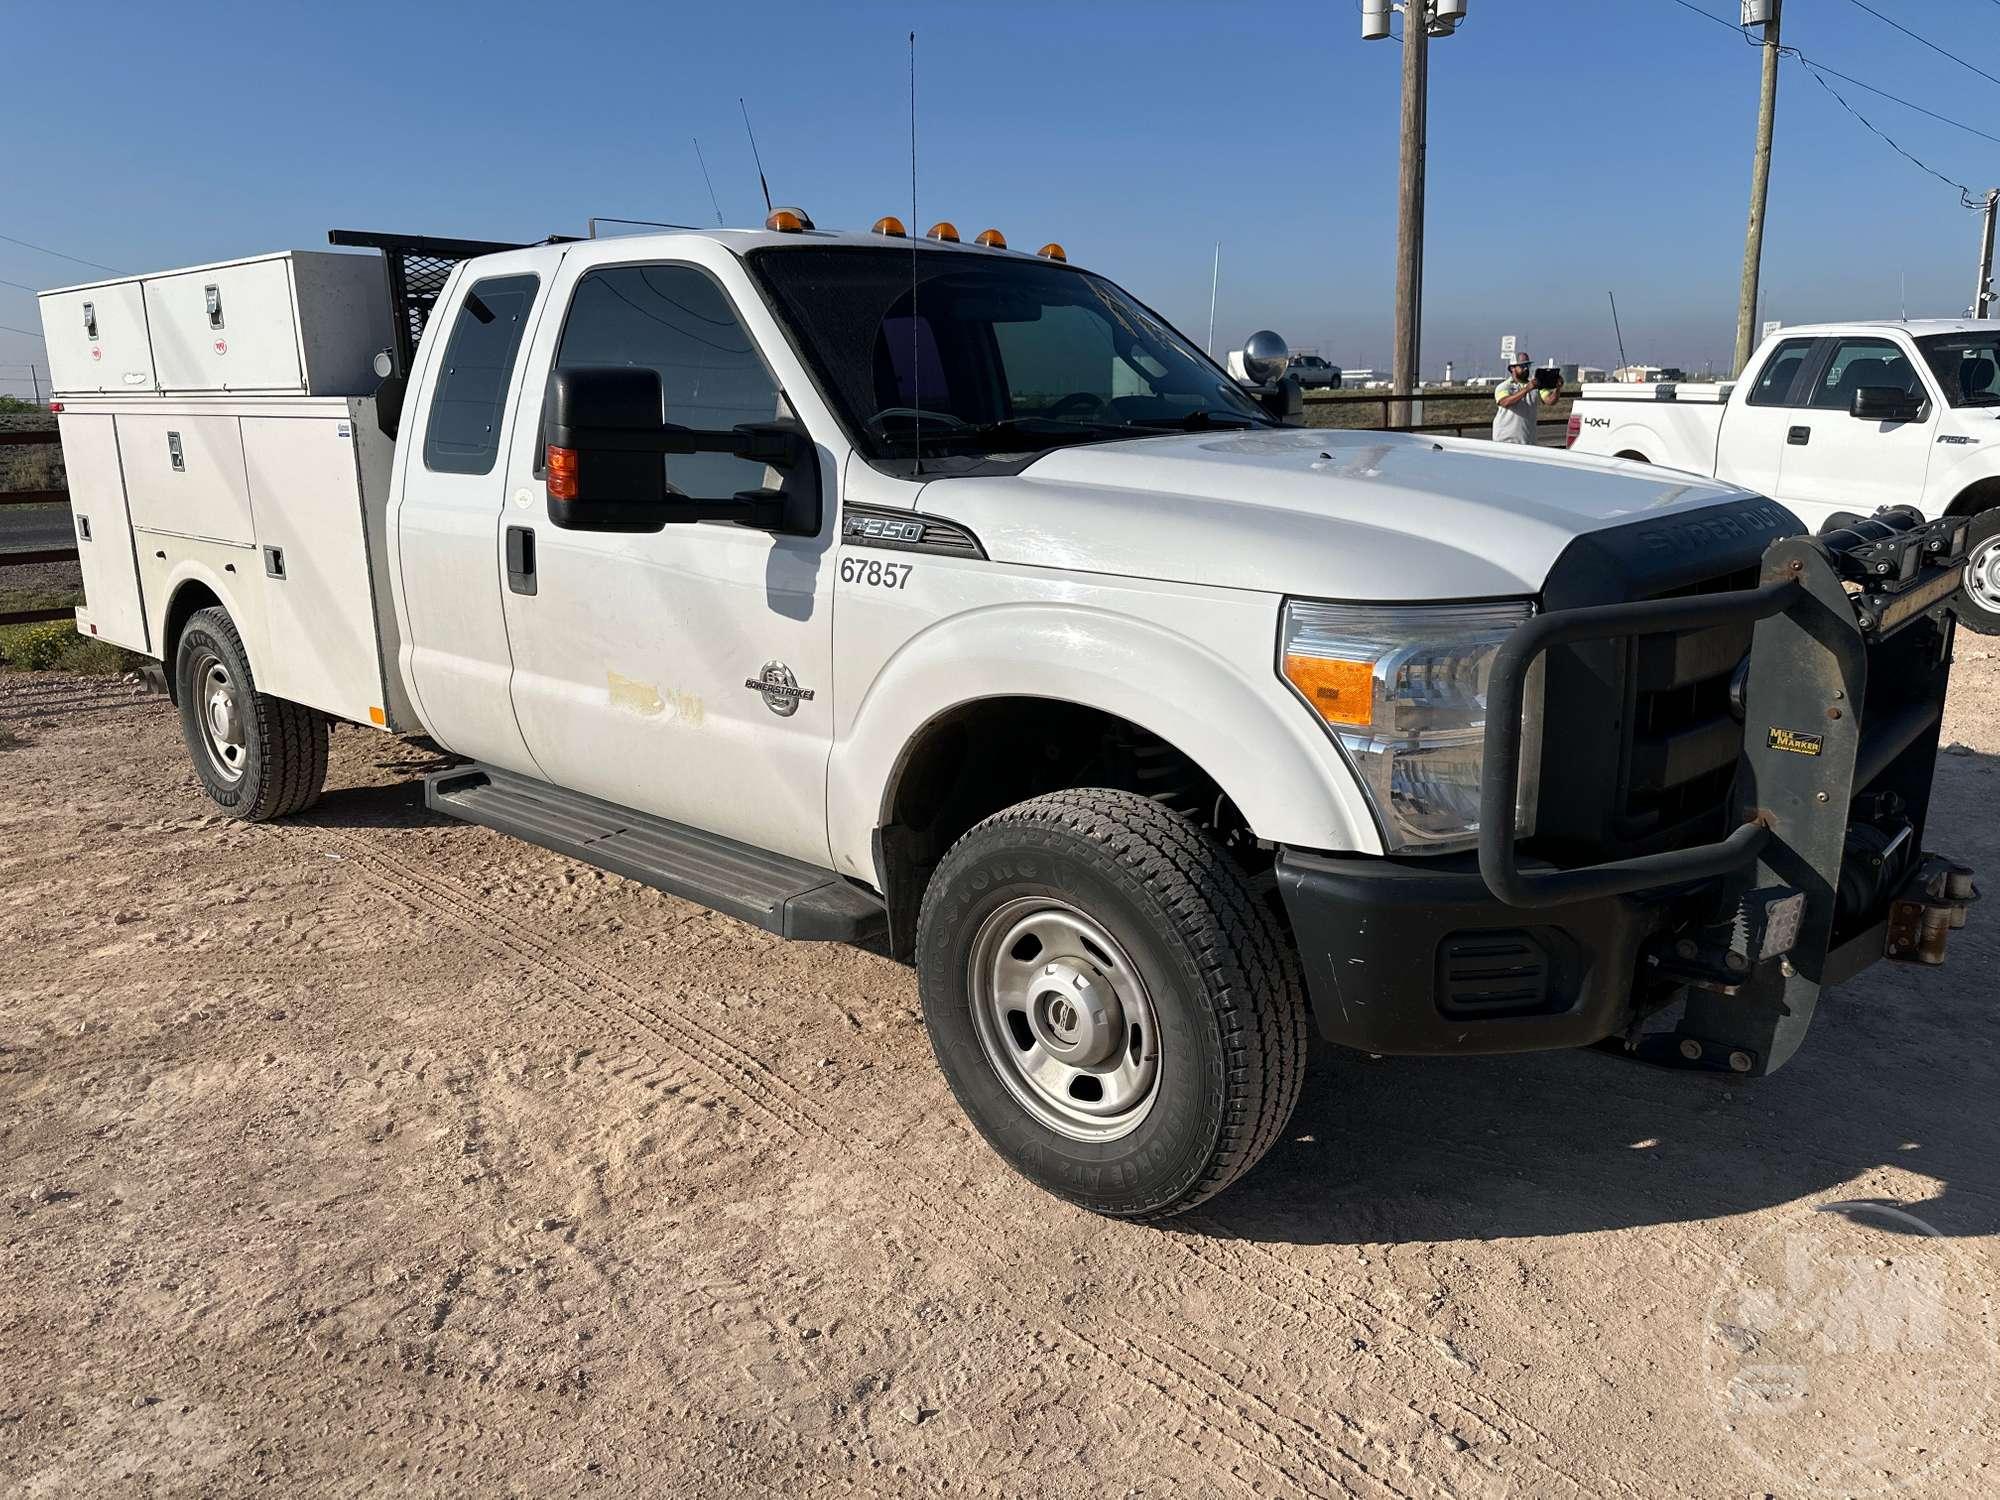 2012 FORD F-350 SUPER DUTY EXTENDED CAB 4X4 UTILITY TRUCK VIN: 1FD8X3FTXCEB93374